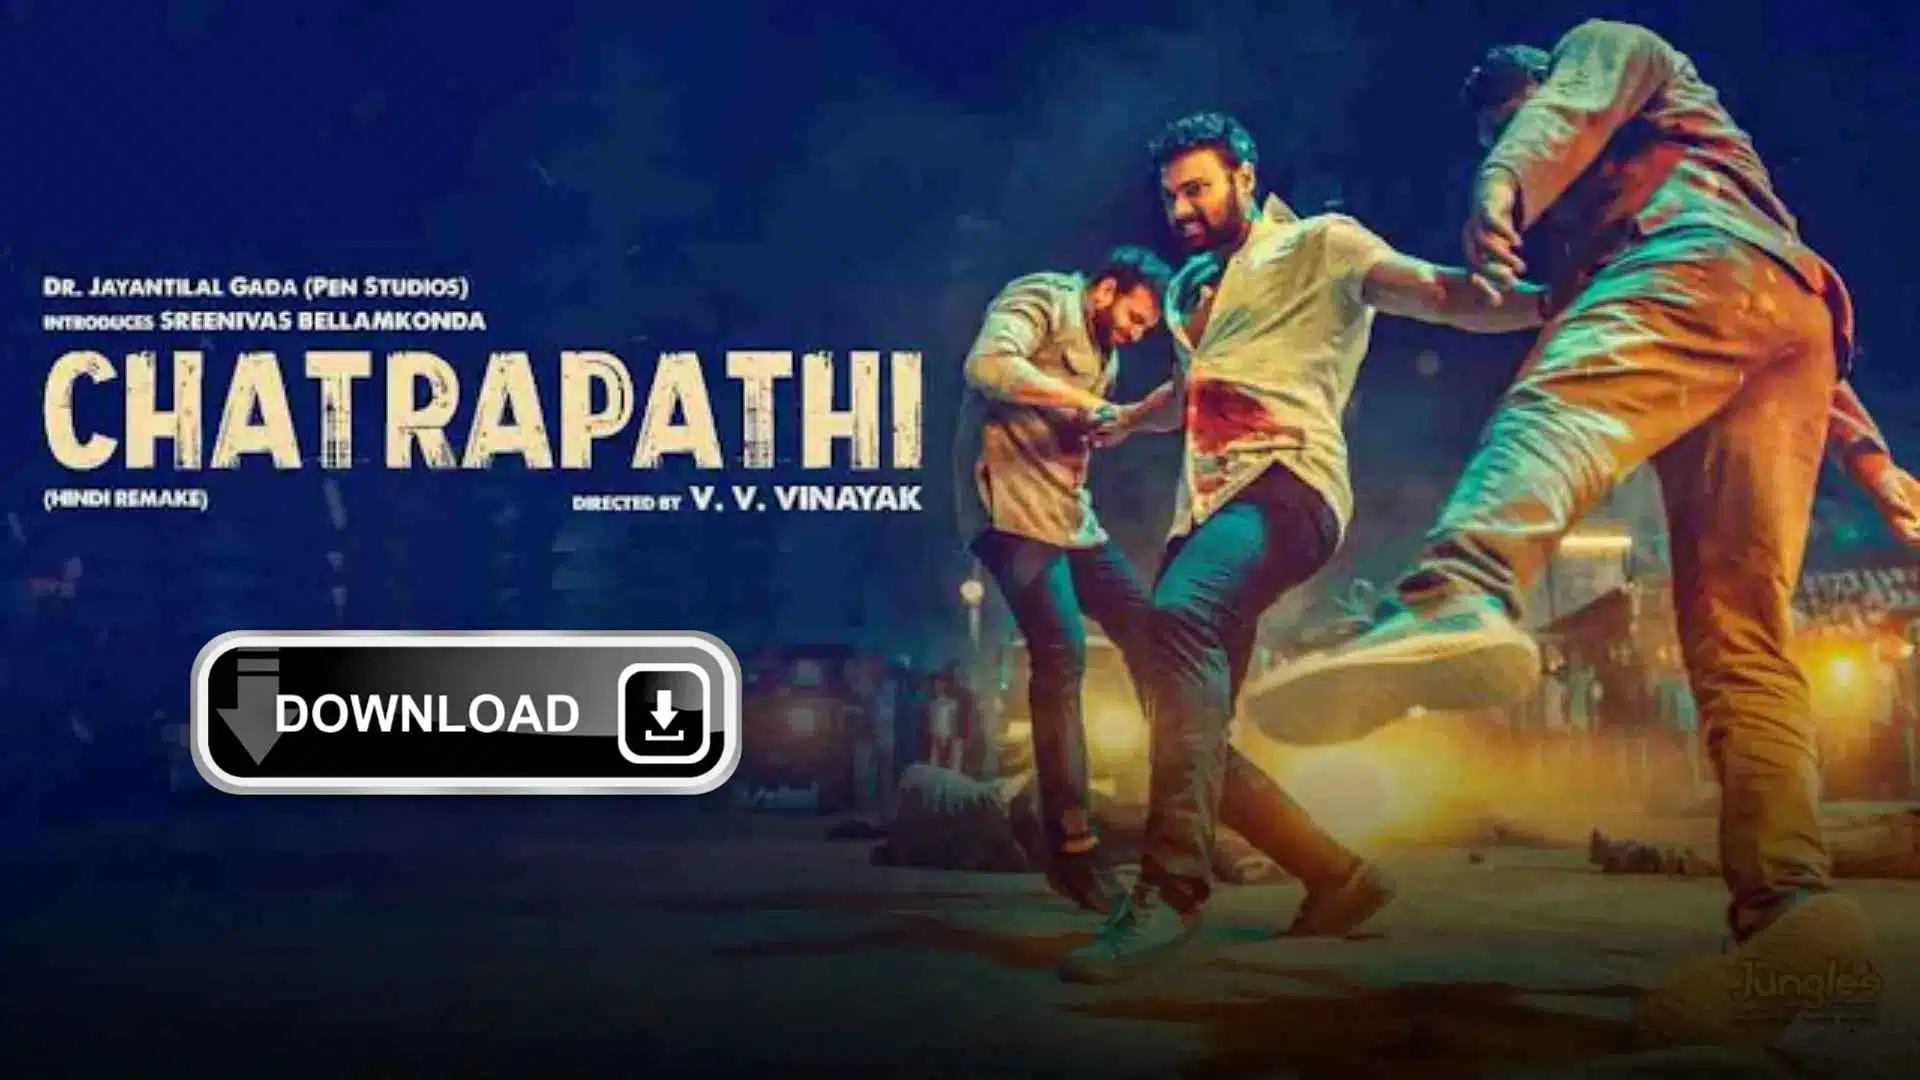 Chatrapathi Movie Download